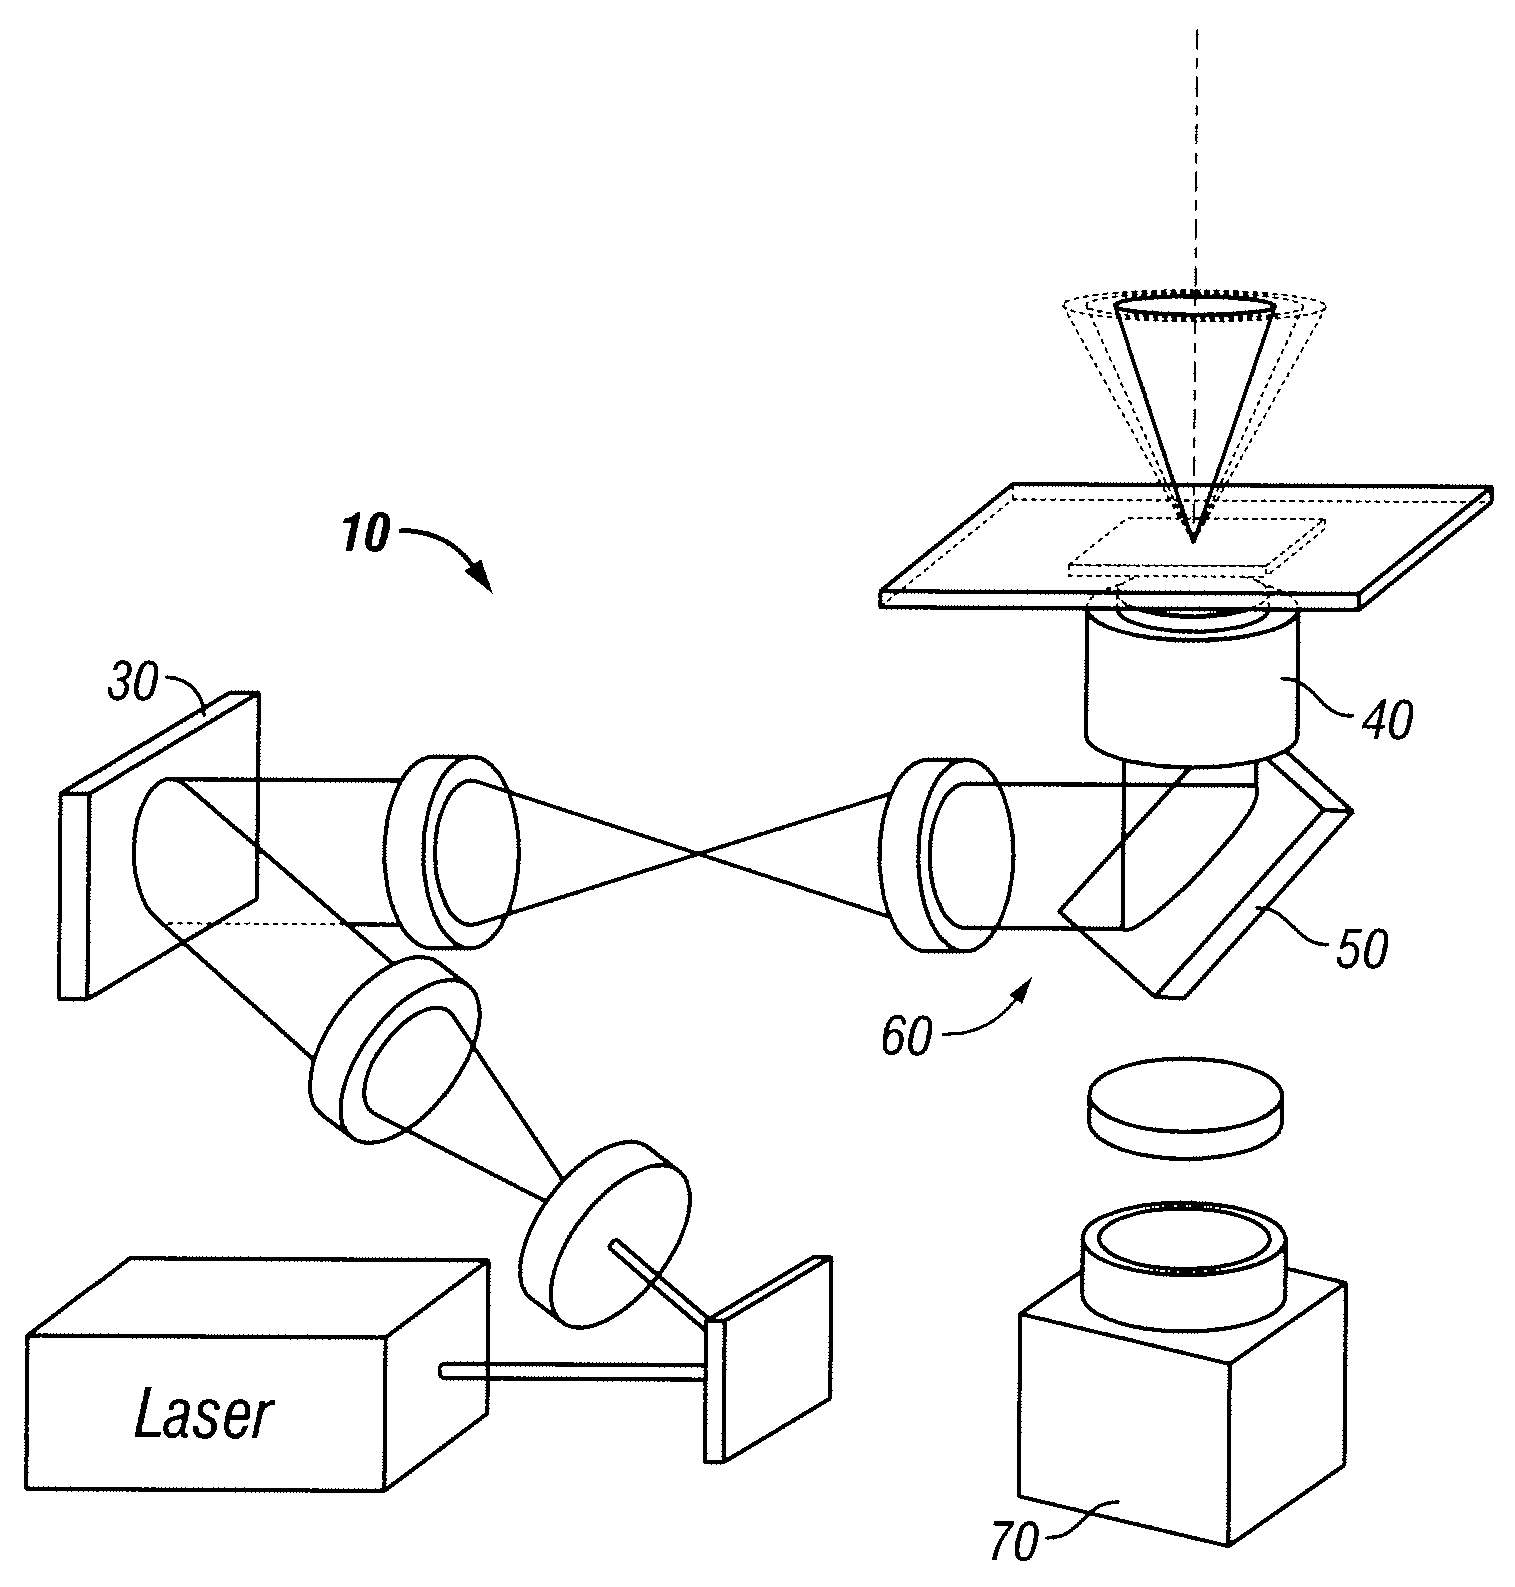 System for applying optical forces from phase gradients